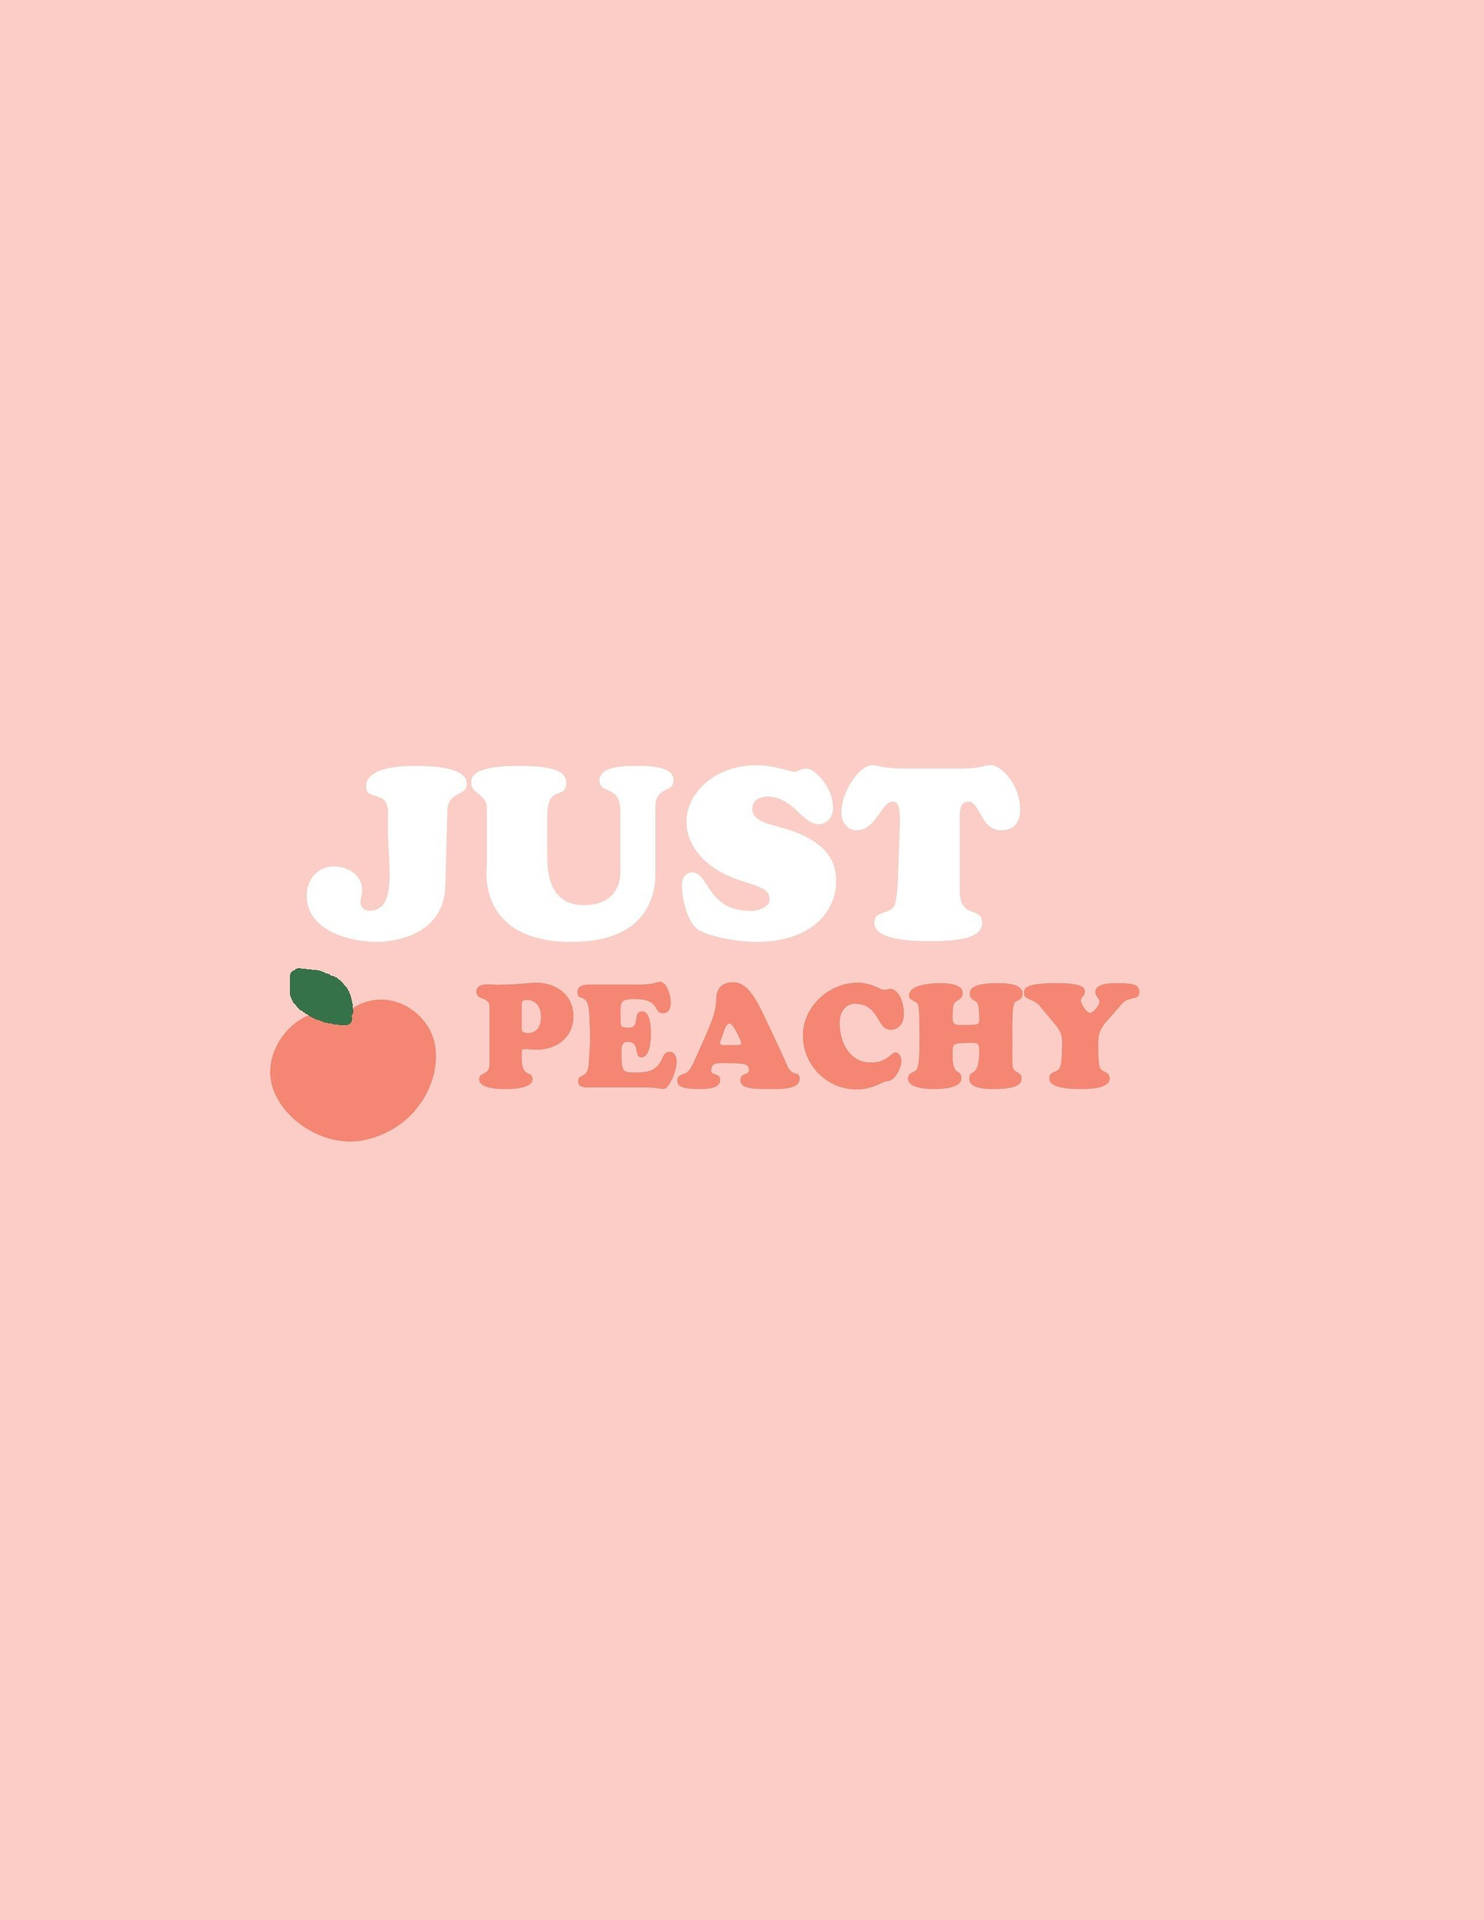 80 Peach HD Wallpapers and Backgrounds